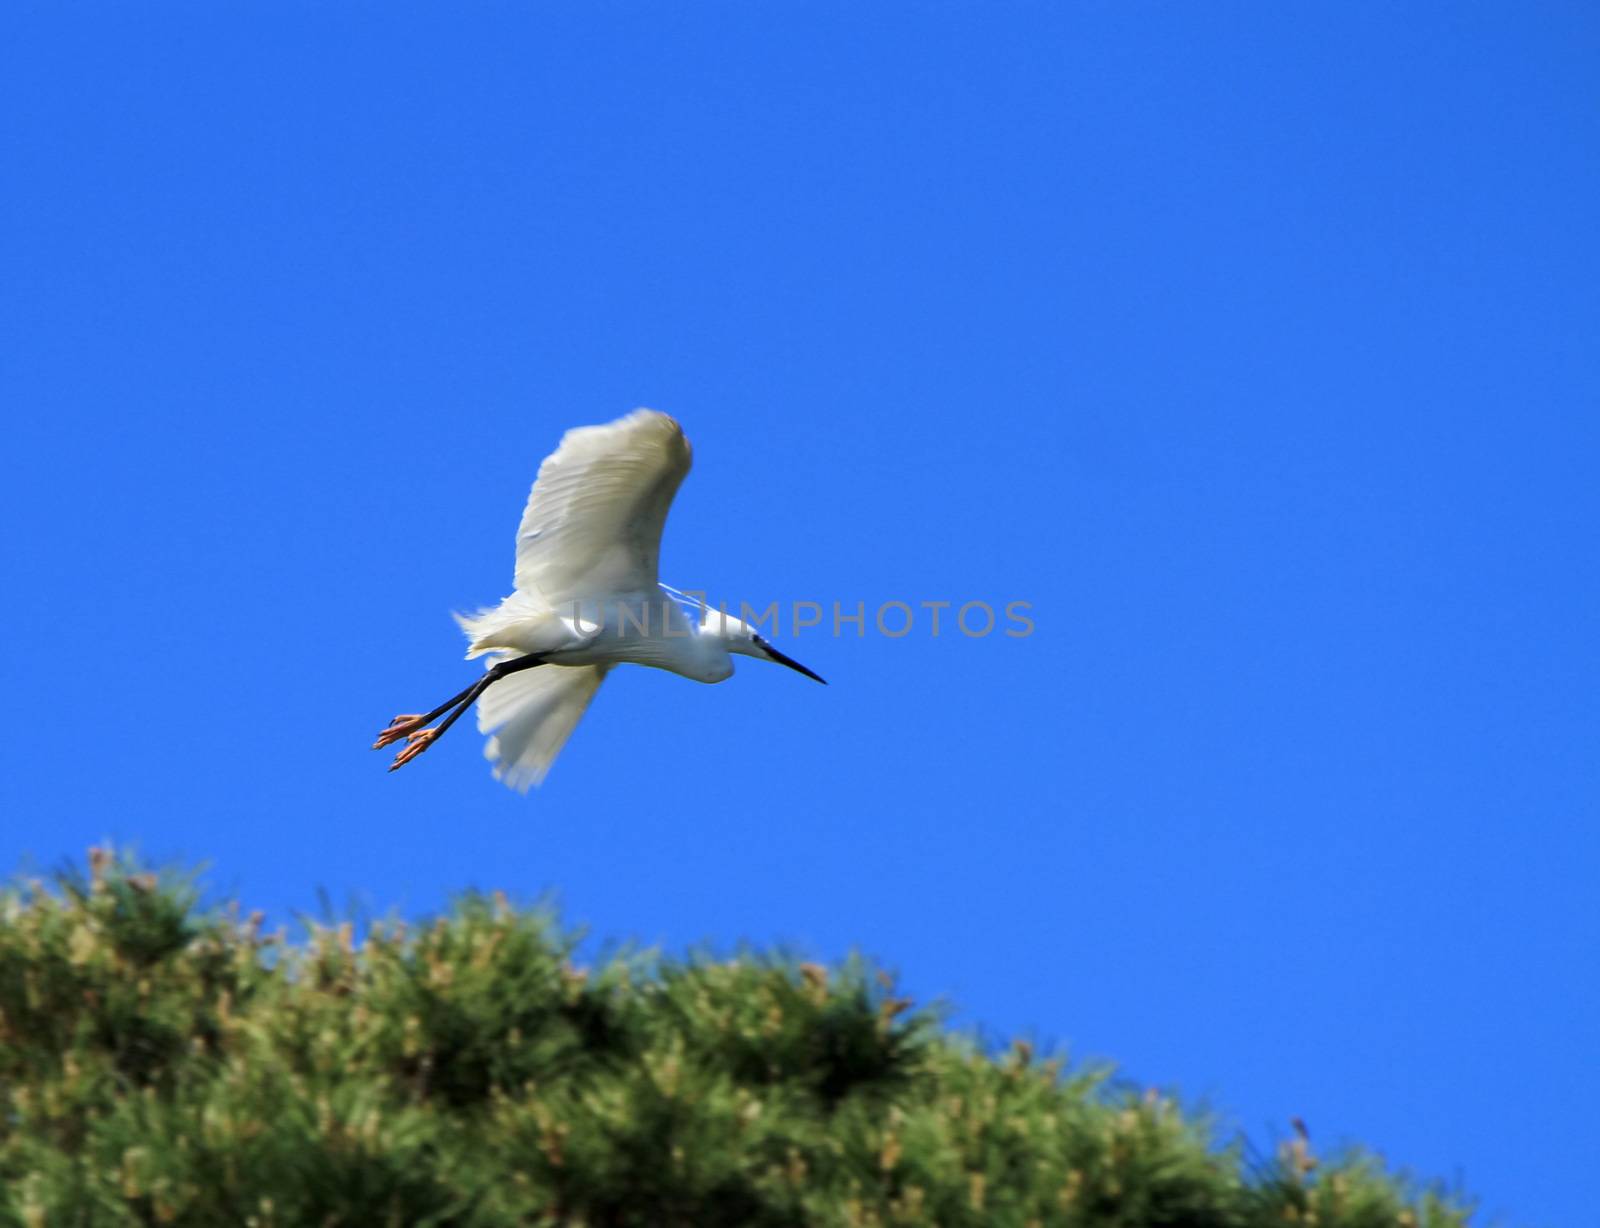 Egret flying from tree by Elenaphotos21